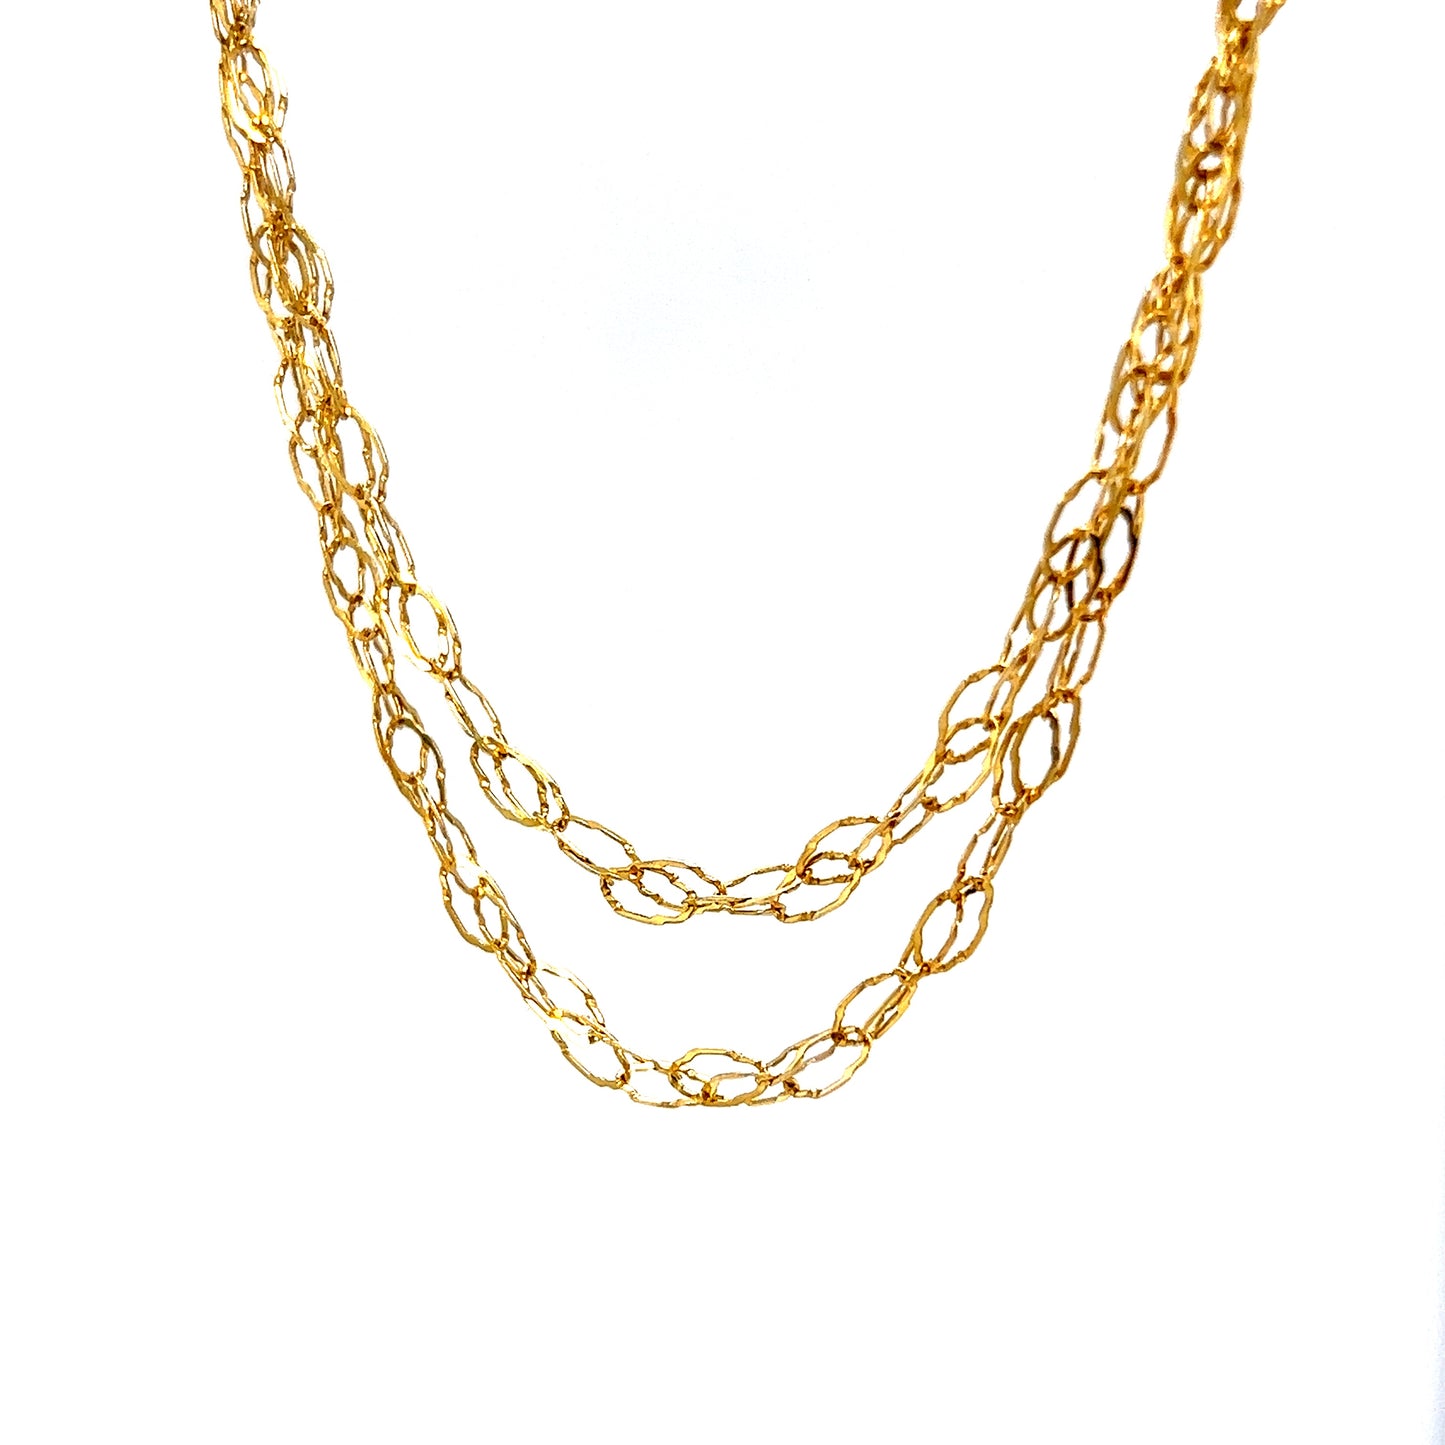 35" Chain Link Necklace in 14k Yellow Gold